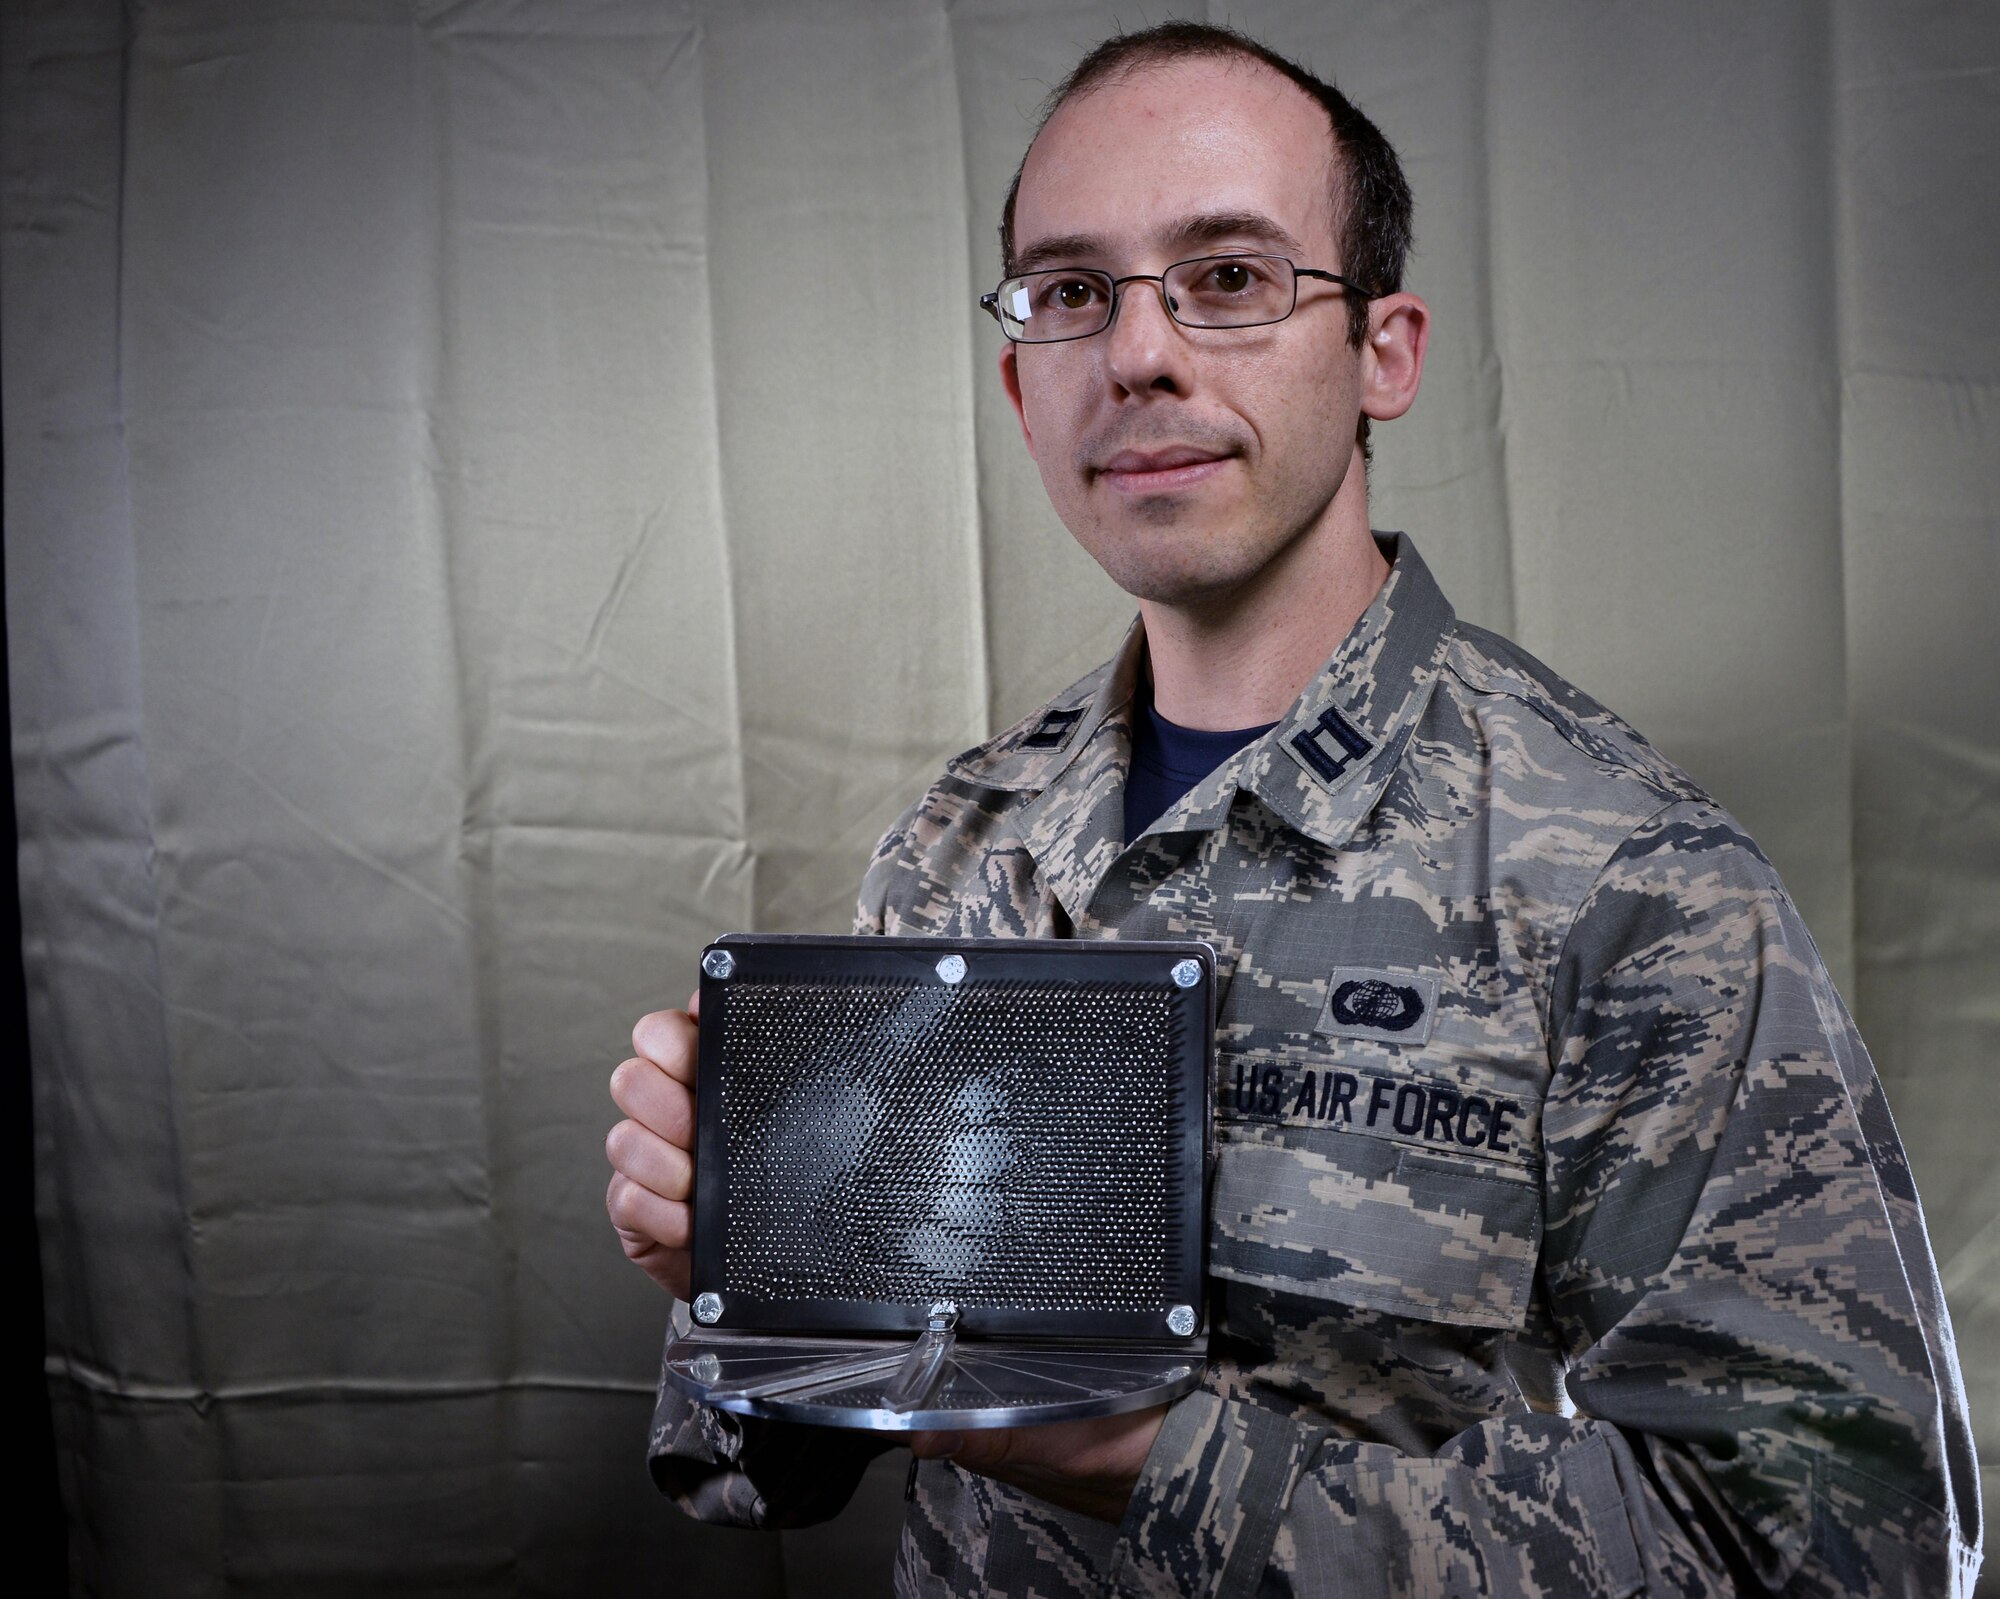 Air Force officer’s inventions inspired by Pin Art, E Ink > Air Force